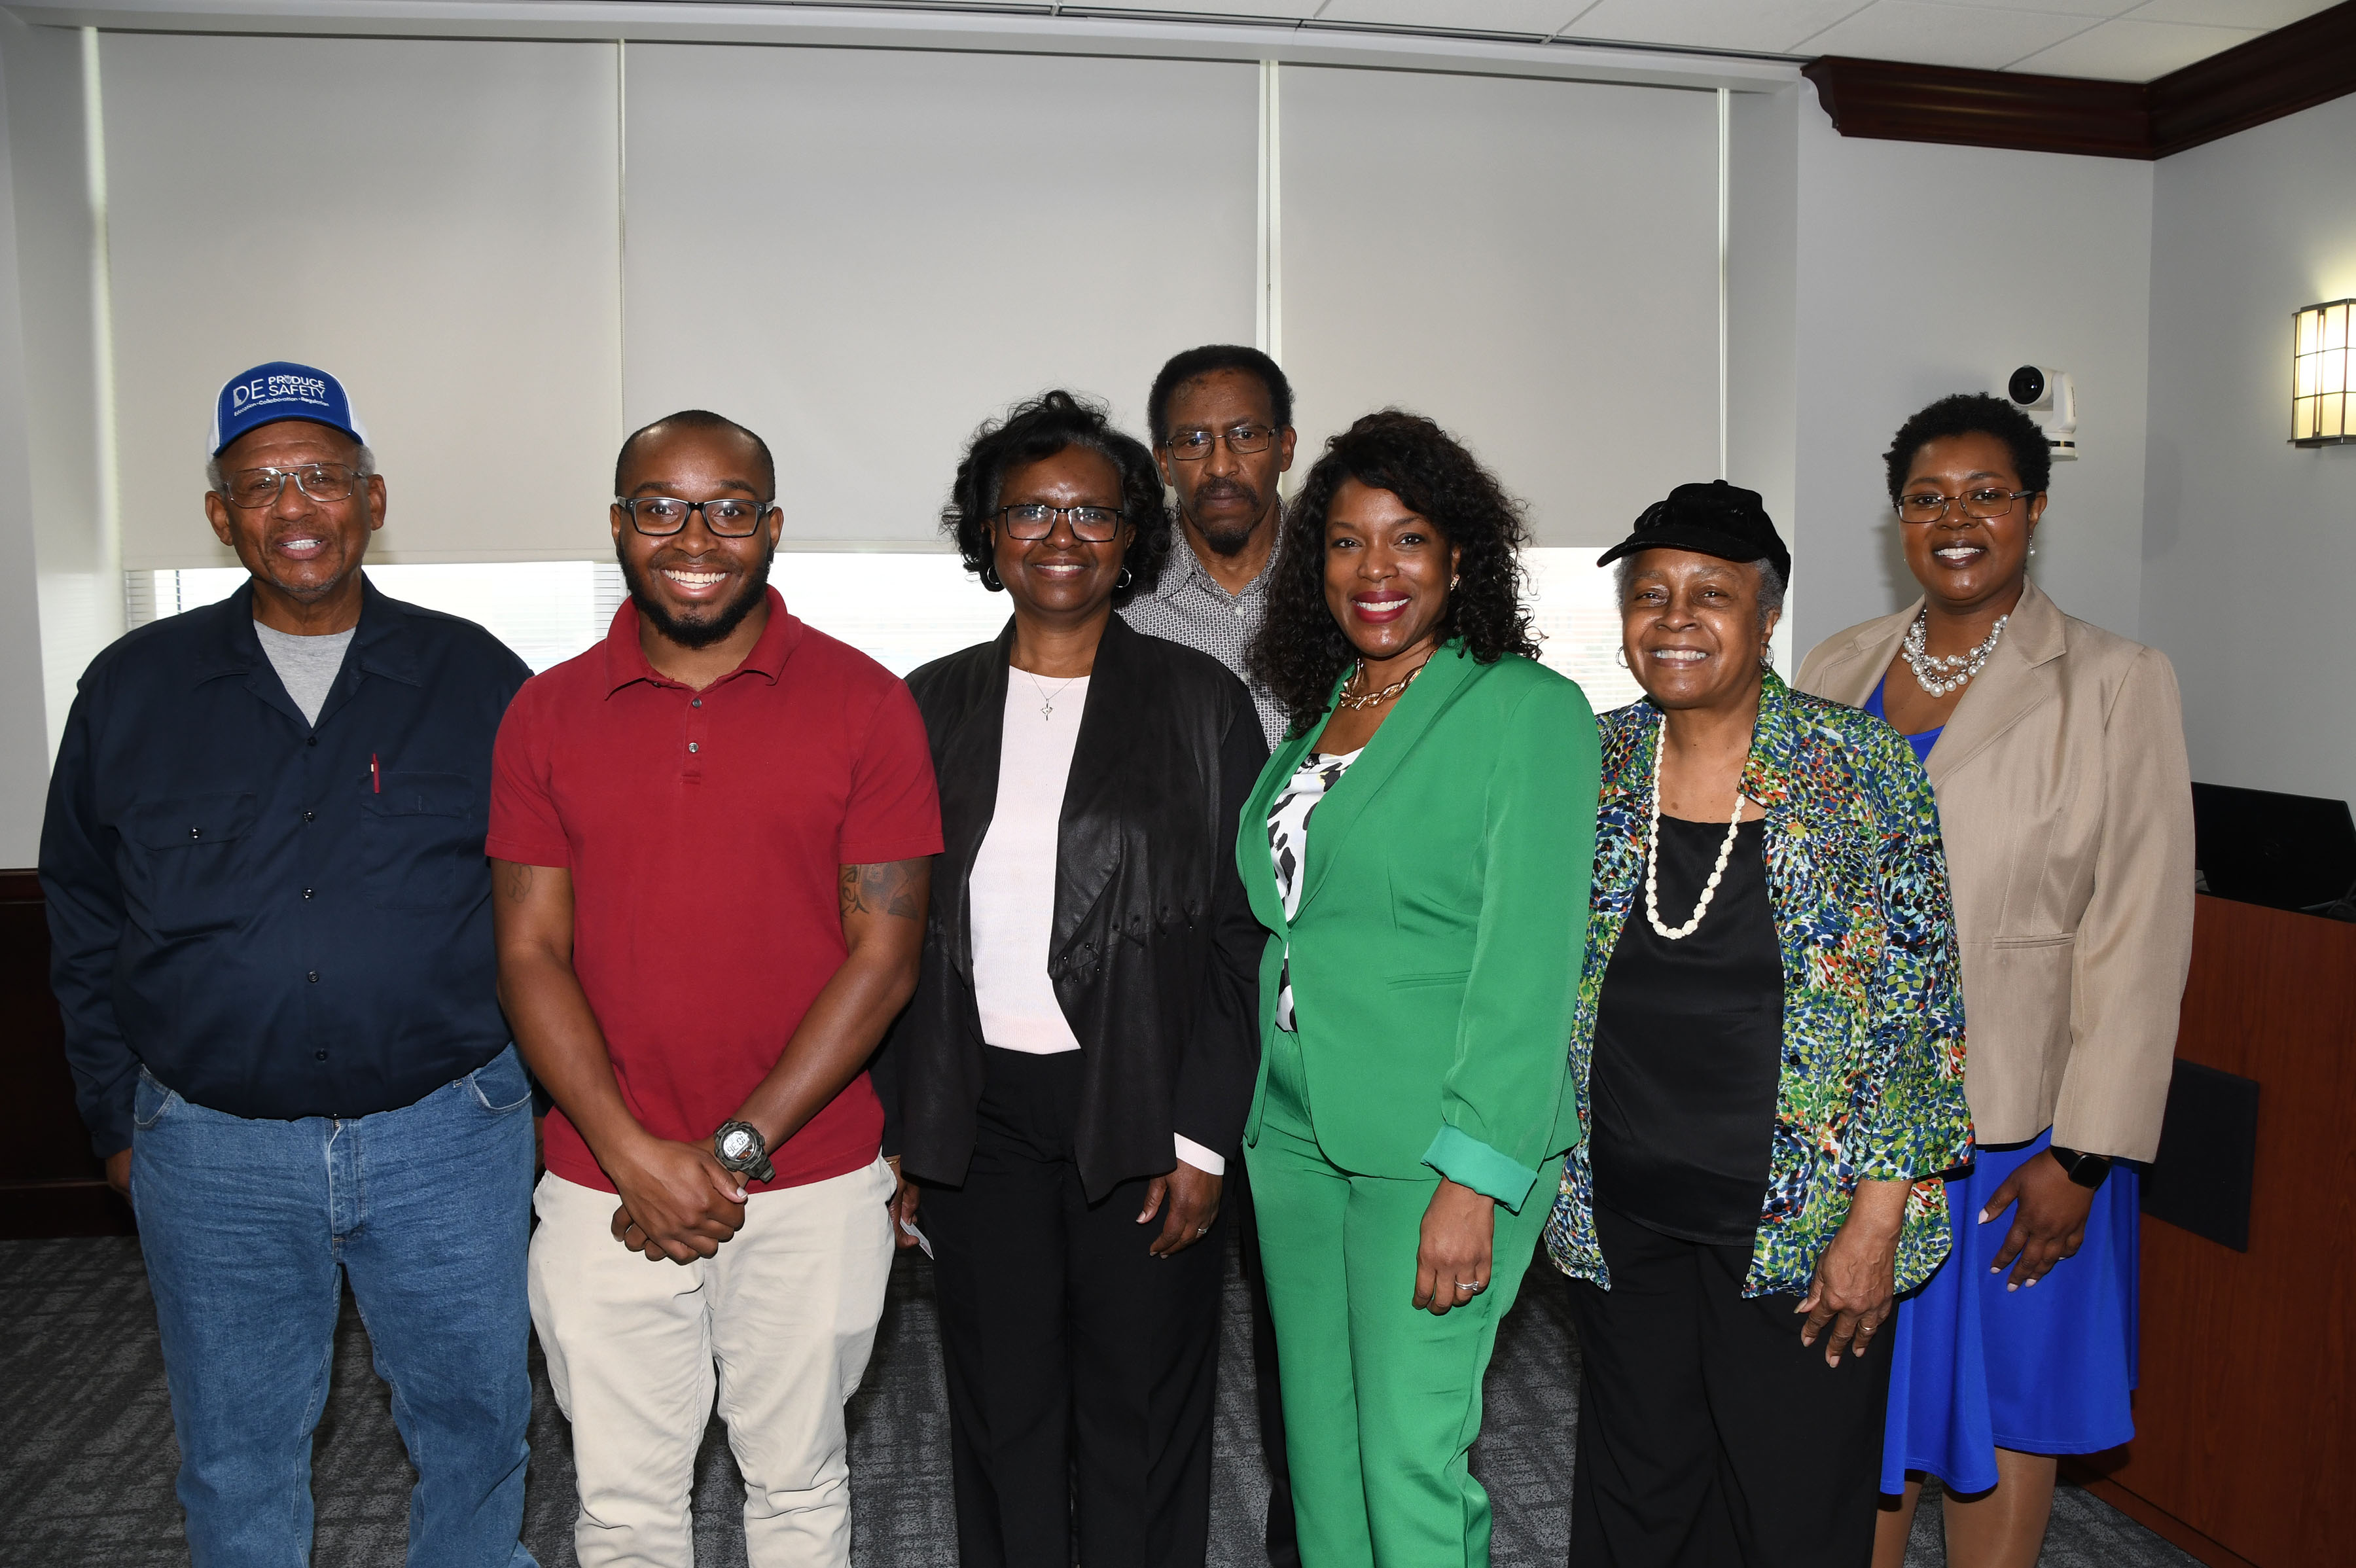 Dr. Cherese Winstead Casson (in green) stands with the 1st State African American Farmers Association, which attended the event.